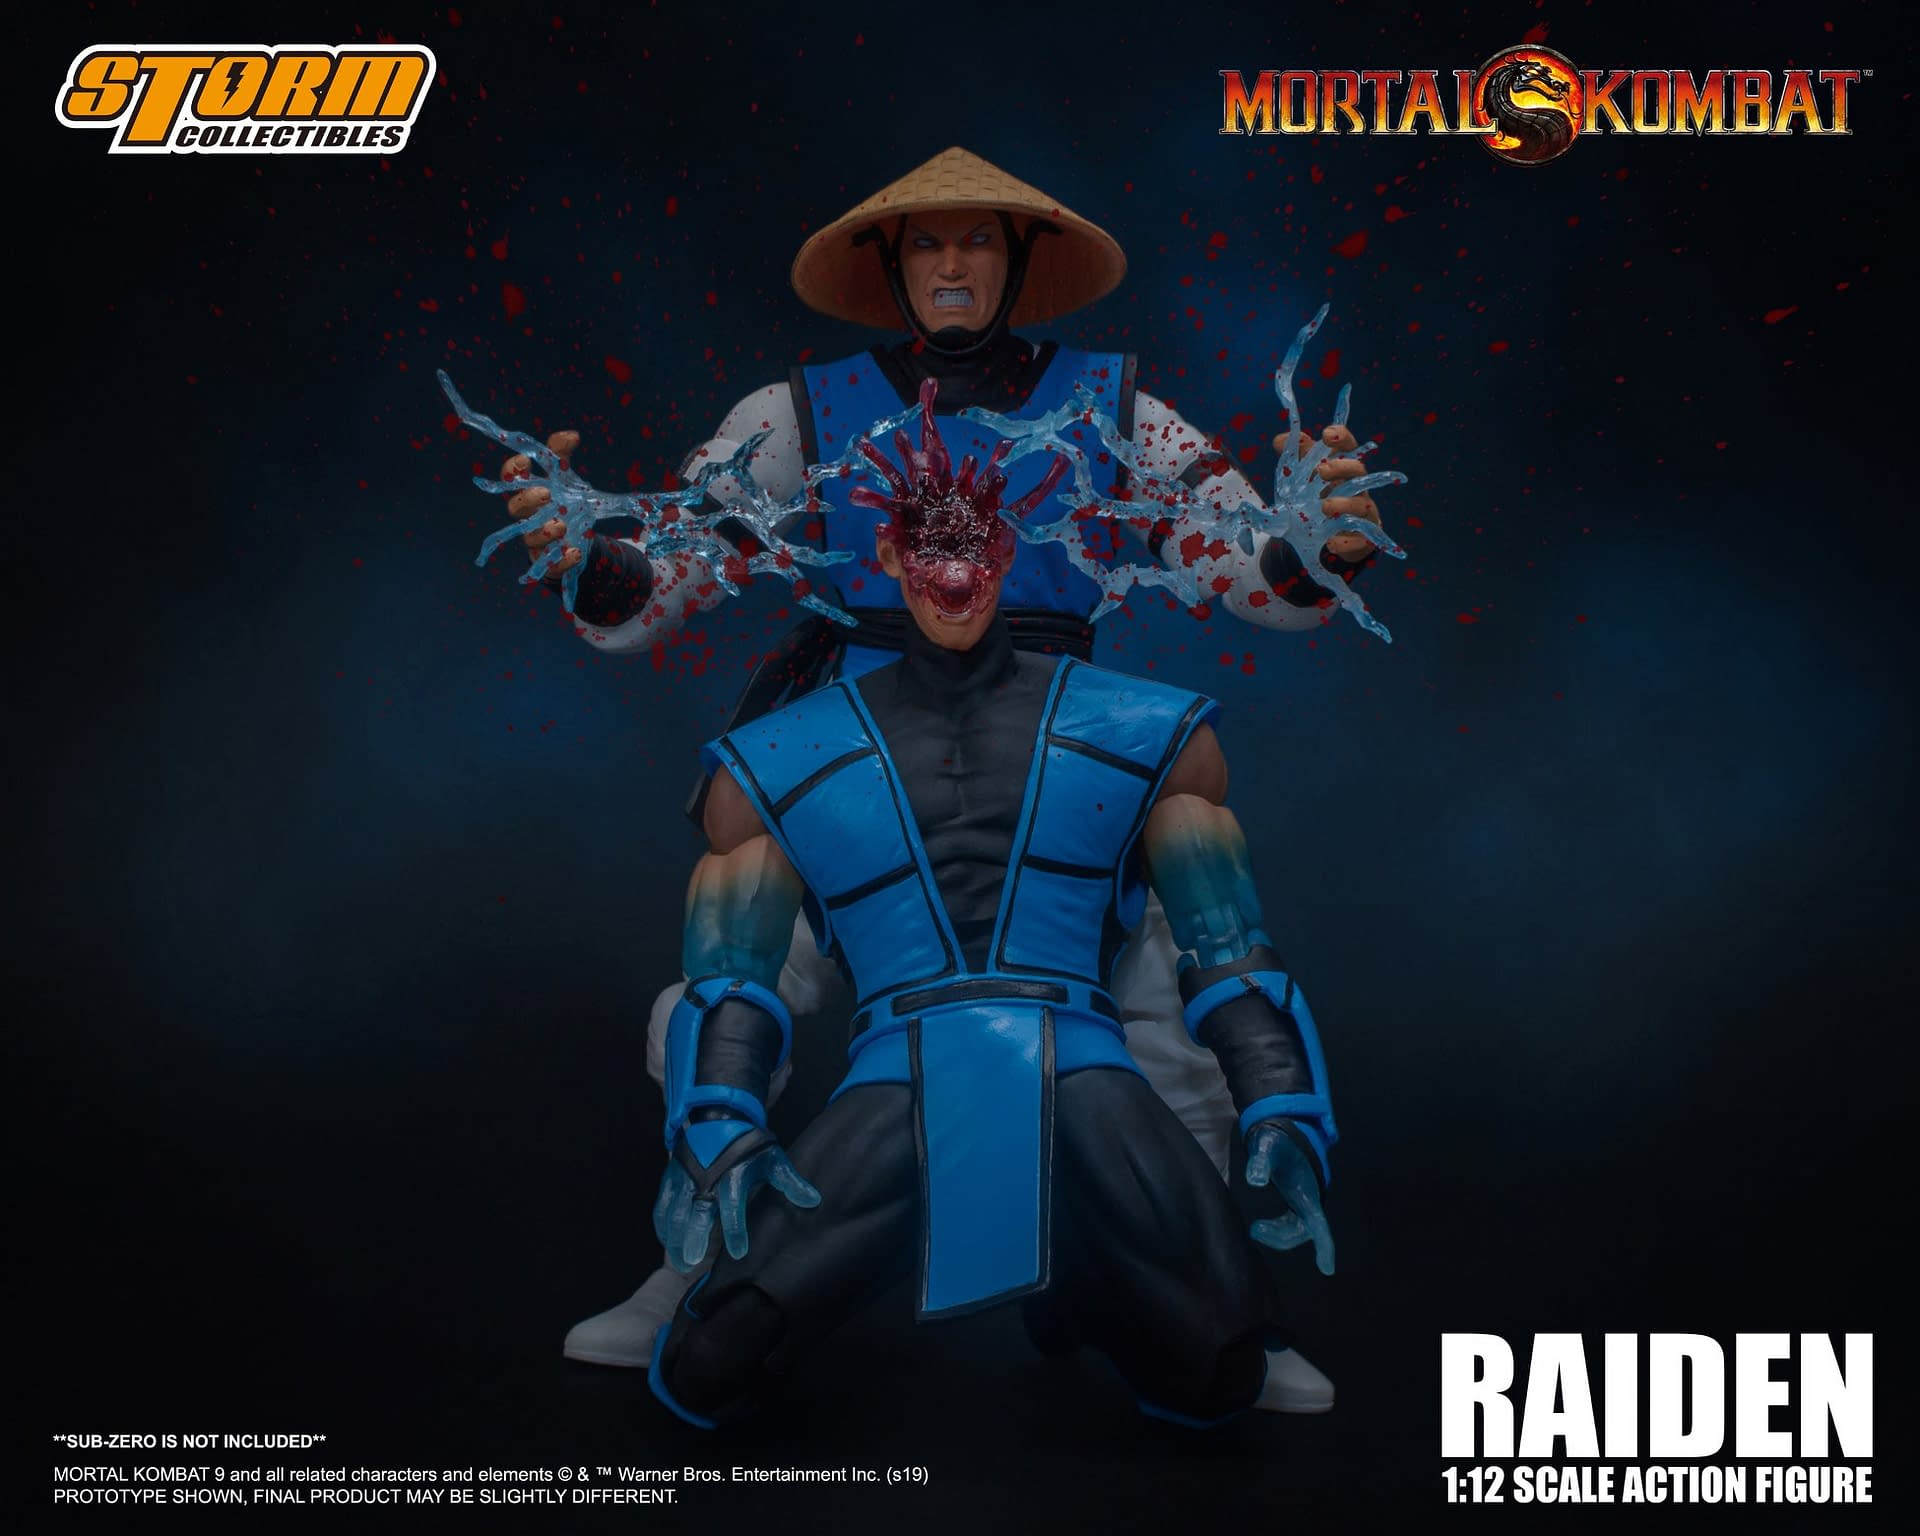 "Mortal Kombat" Gets a New Challenger with Storm Collectibles